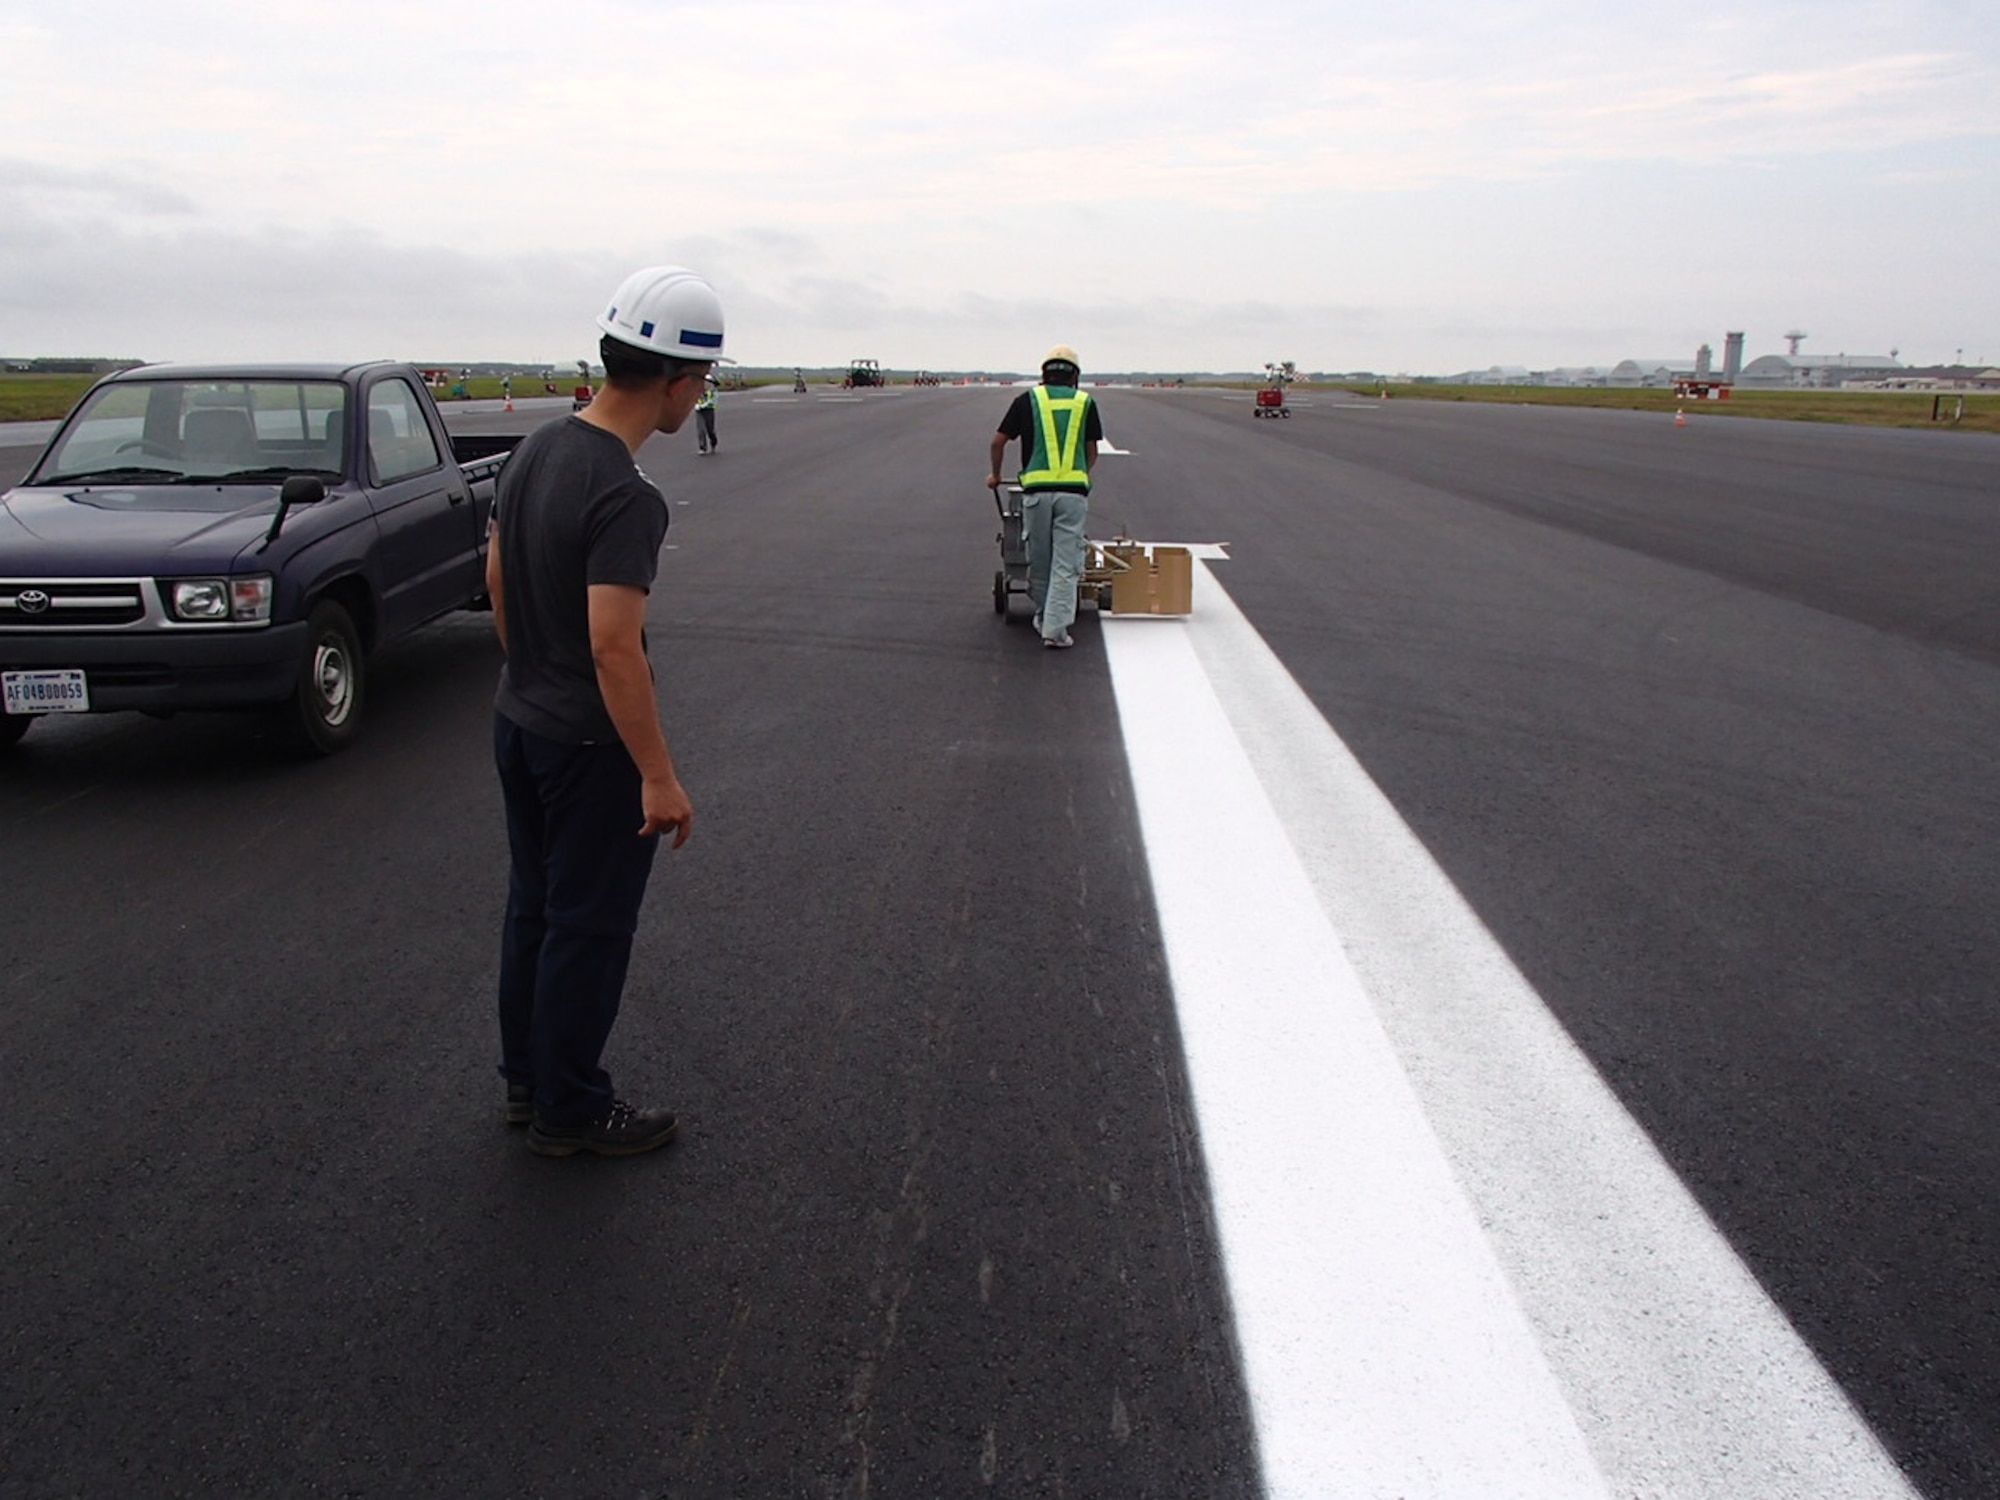 Civil engineering crews mark the runway at Misawa Air Base, Japan, July 31, 2016. The project cost more than $2.1 million, using four milling machines, two pavers, 76 dump trucks and approximately 80 on-site personnel, ultimately enhancing the longevity of the runway. (Courtesy photo)